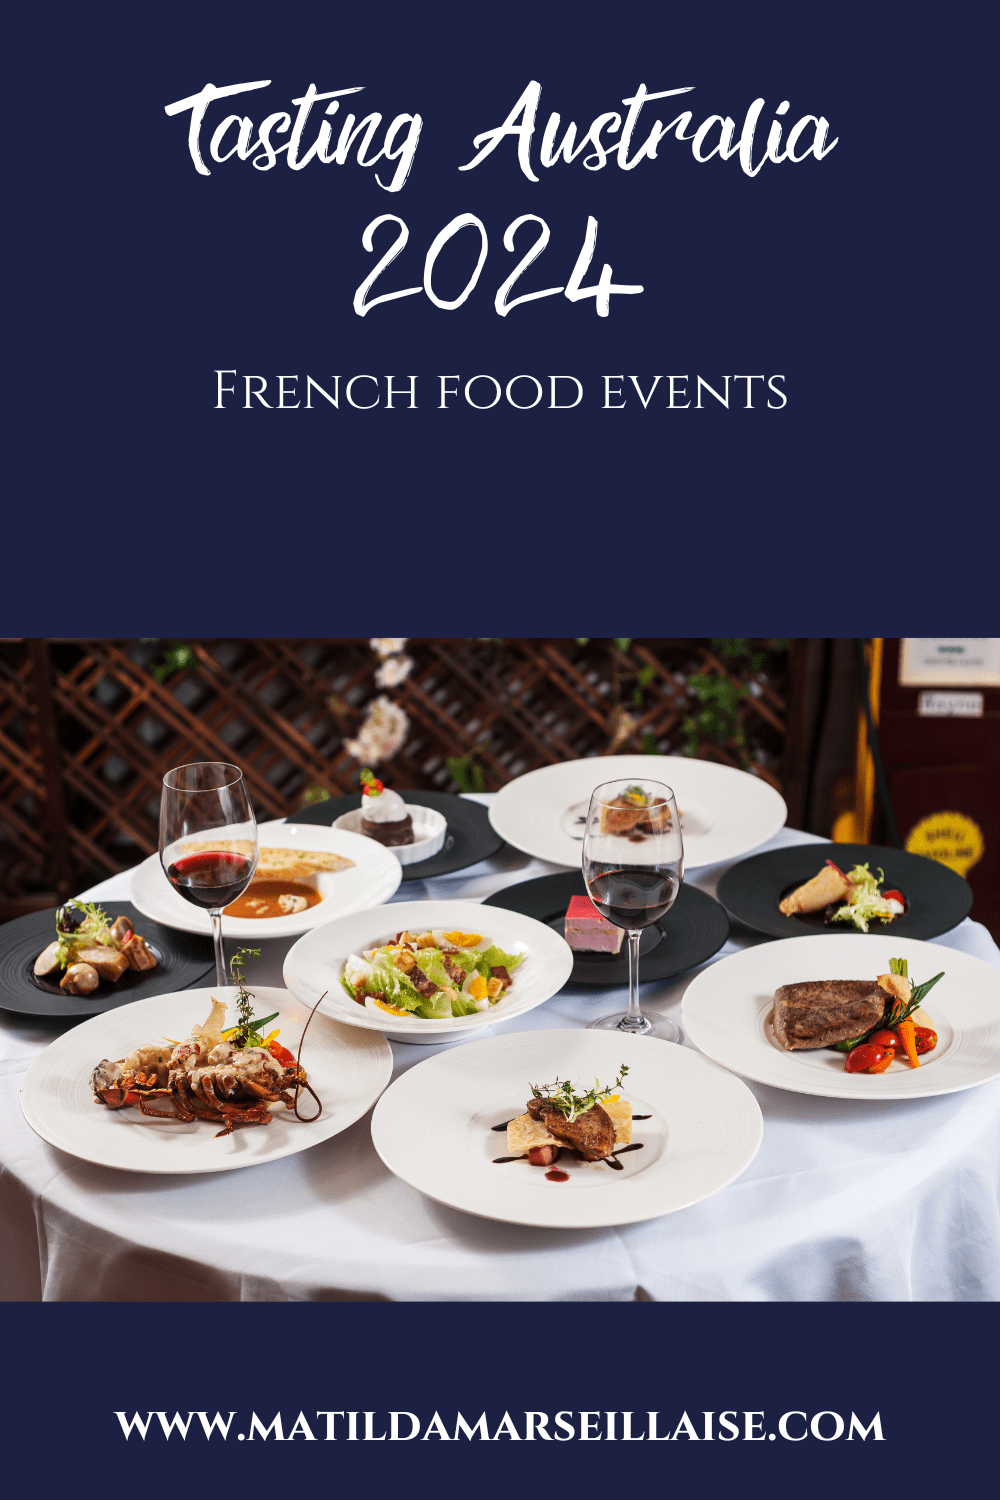 10 unforgettable French food events at Tasting Australia 2024